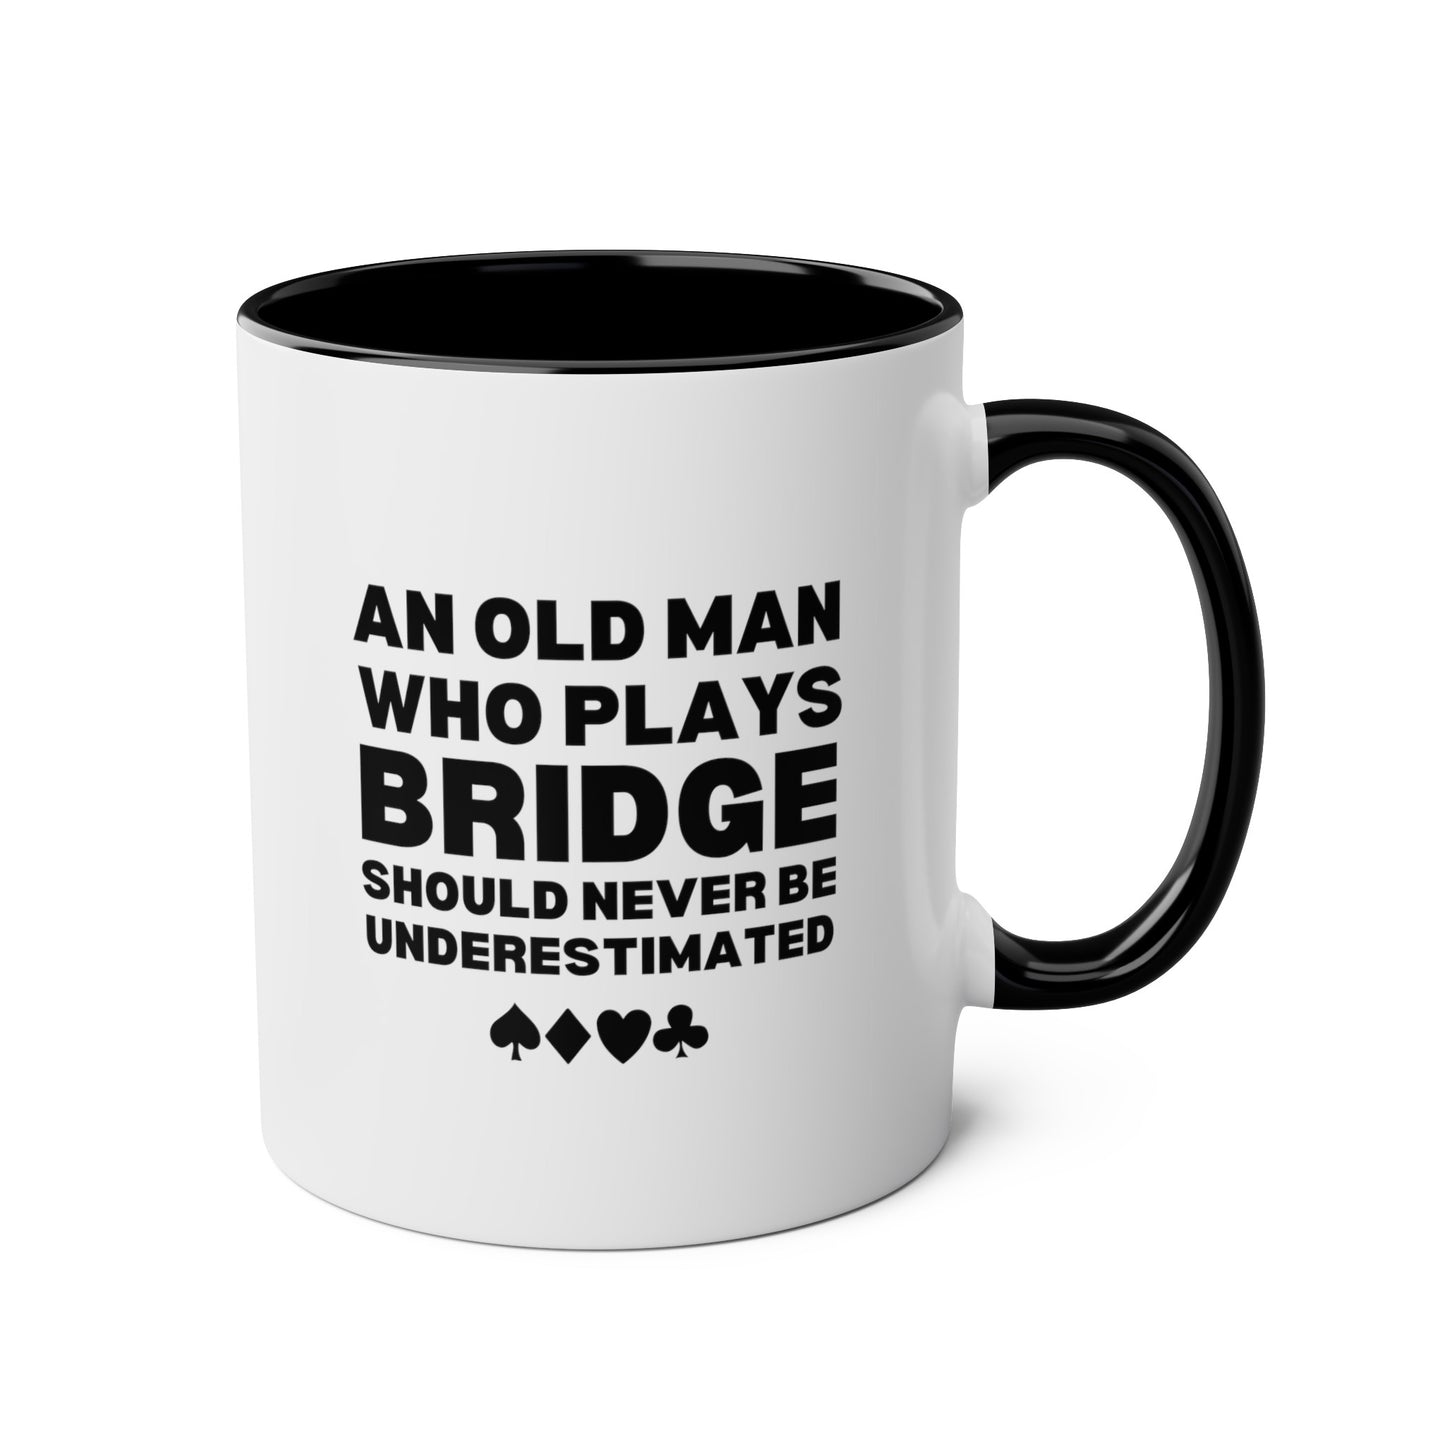 An Old Man Who Plays Bridge Should Never Be Underestimated 11oz white with black accent funny large coffee mug gift for player card game waveywares wavey wares wavywares wavy wares